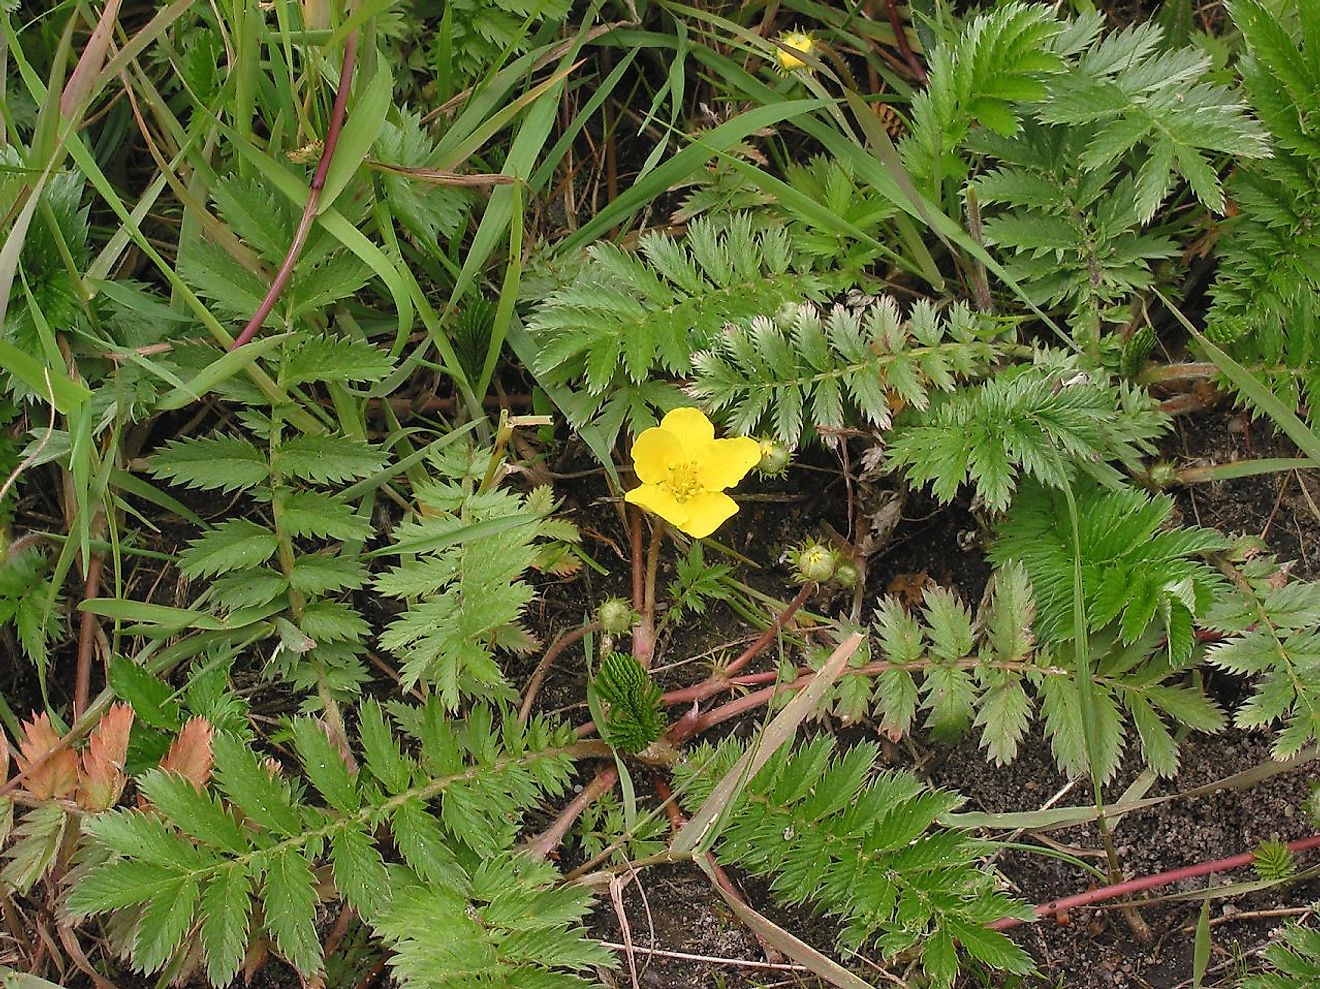 Common Silverweed (Argentina anserina) picture showing red stolons. Image credit: Rasbak/Wikimedia.org